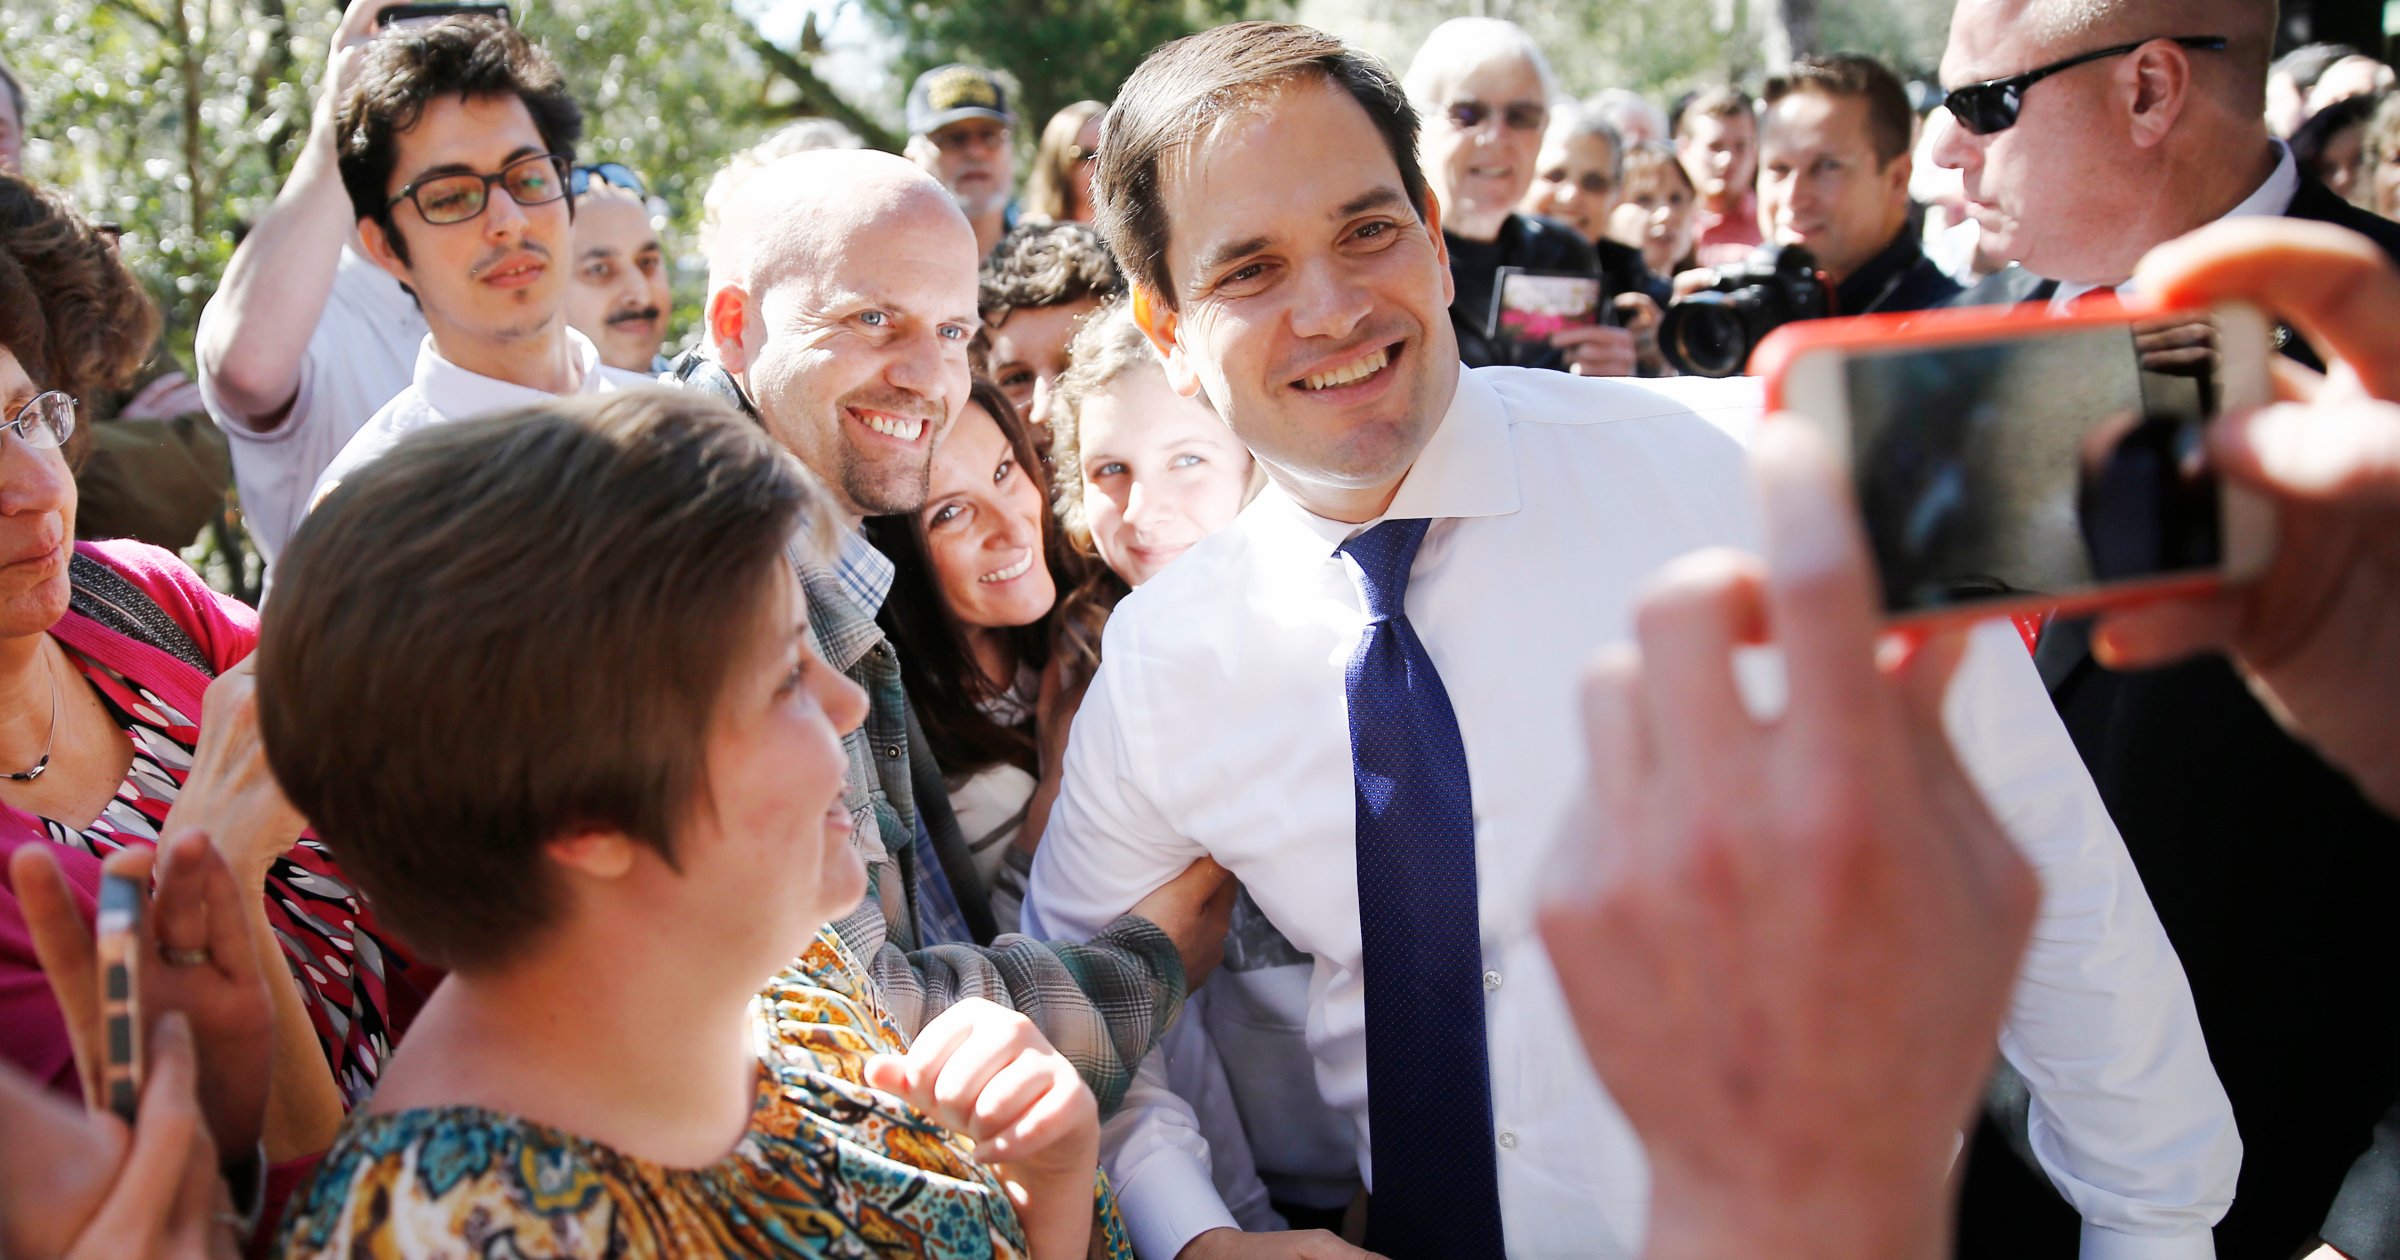 Marco Rubio meets with attendees during a campaign stop on Feb. 16, 2016 in Summerville, S.C.